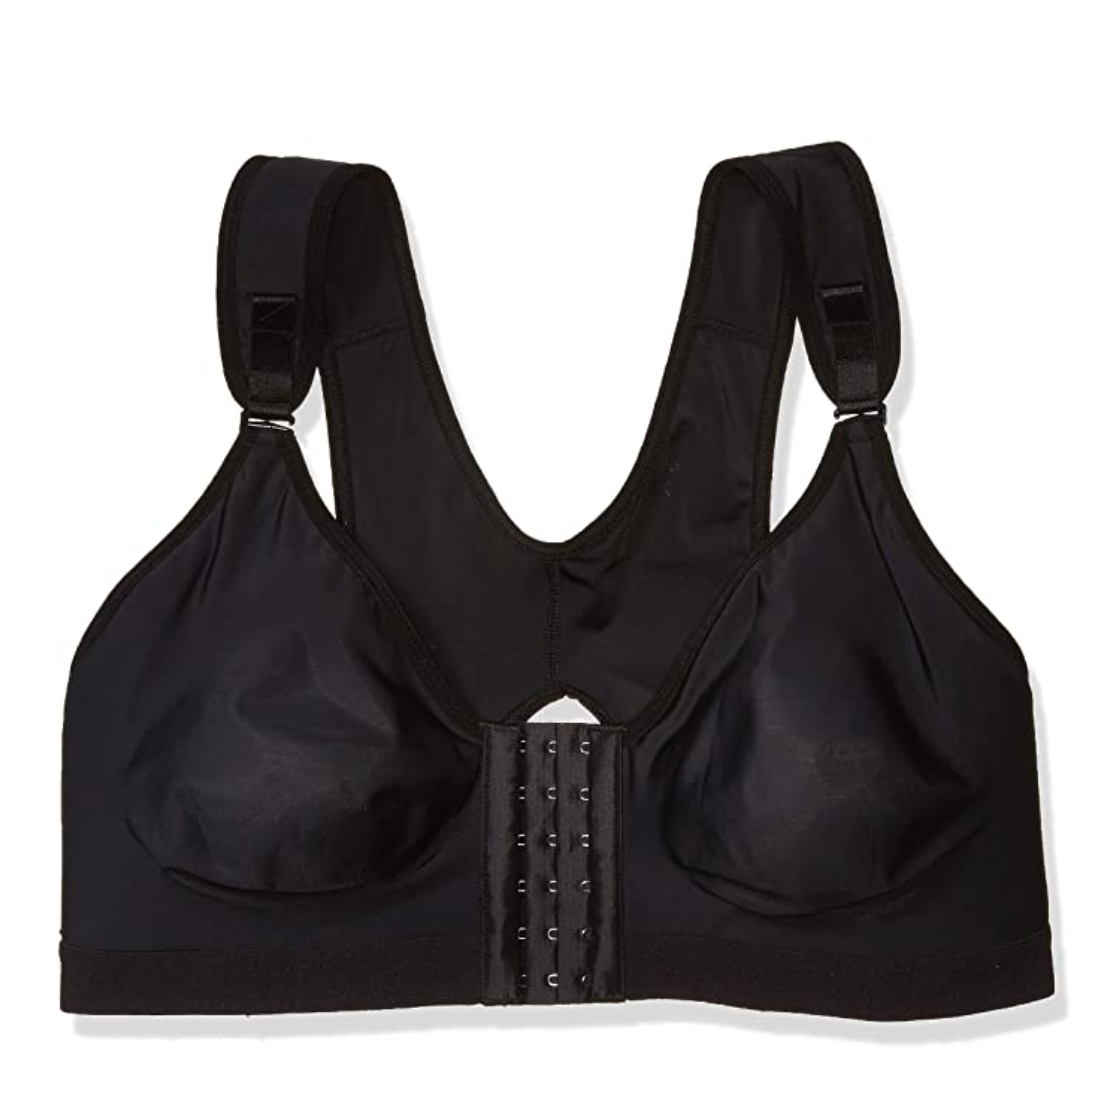 masectomy bras - bras for masectomies